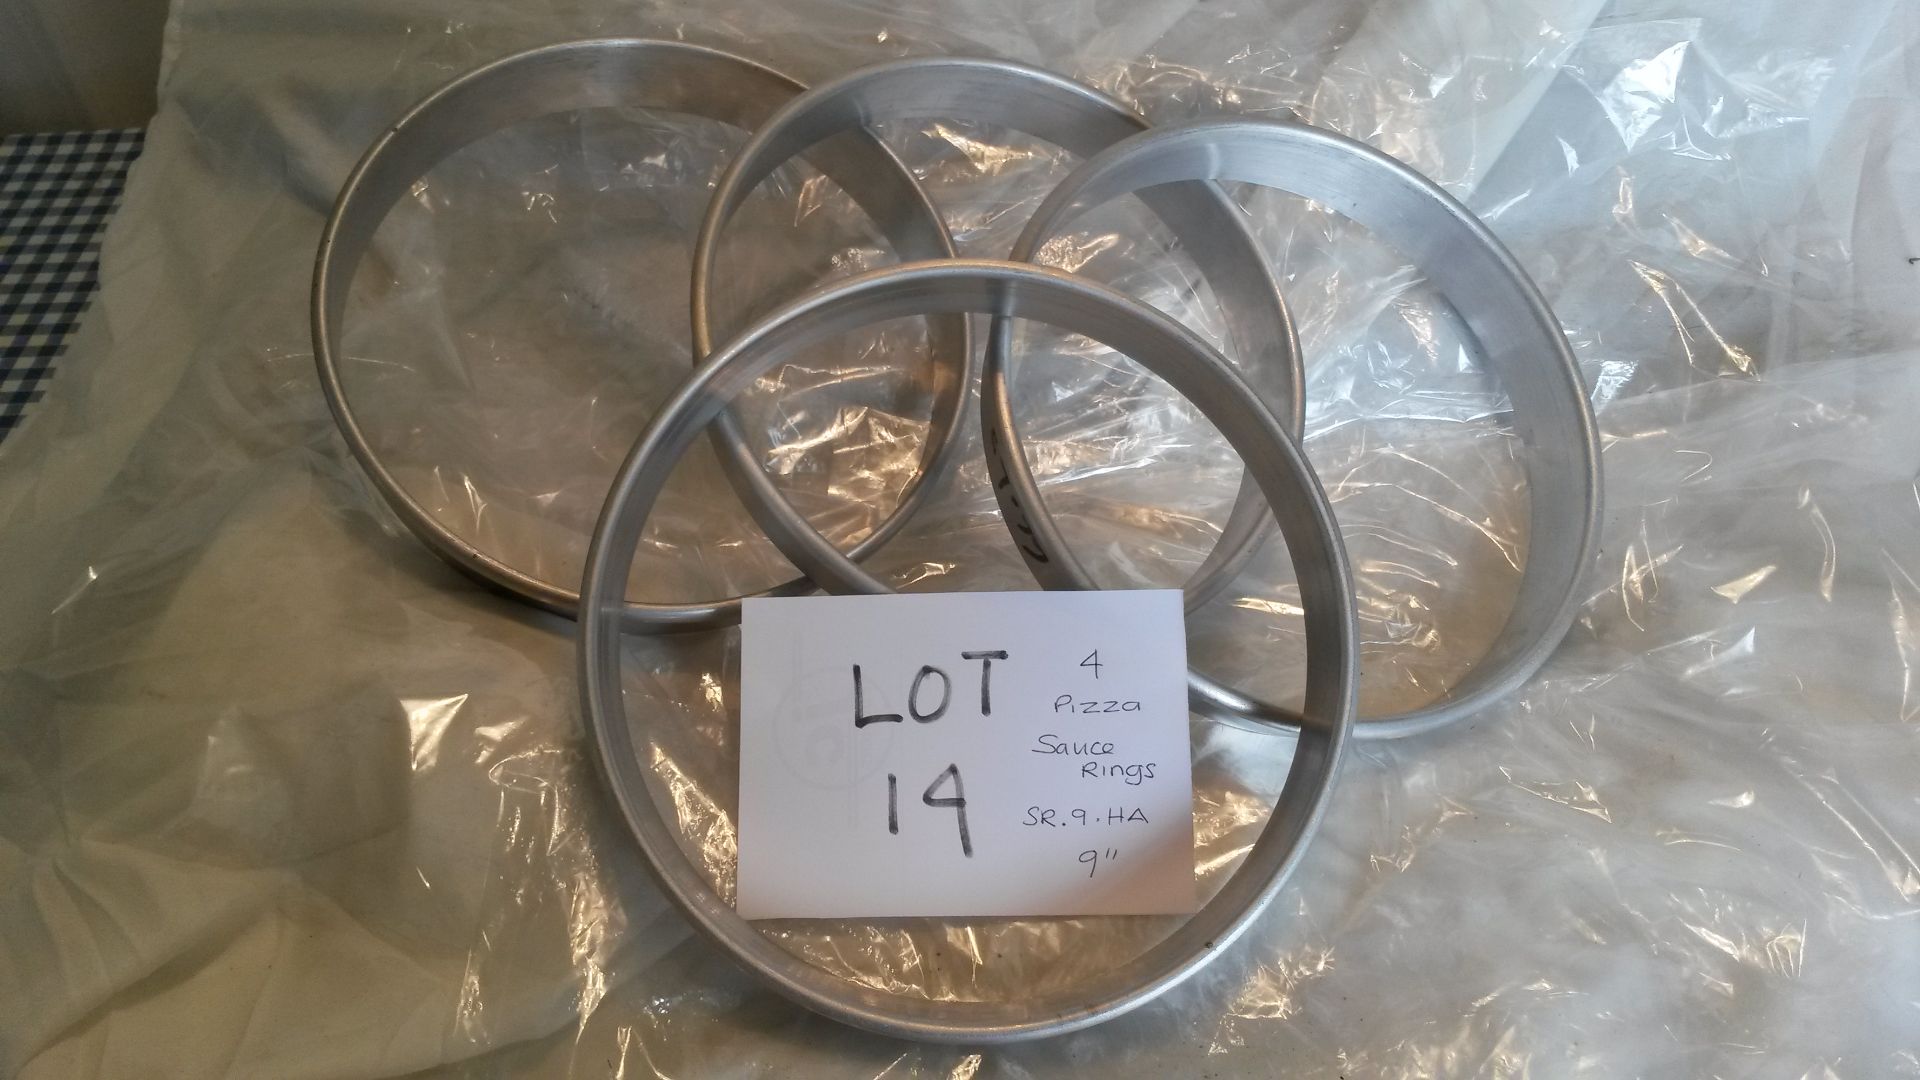 4 x Pizza sauce ring 230mm